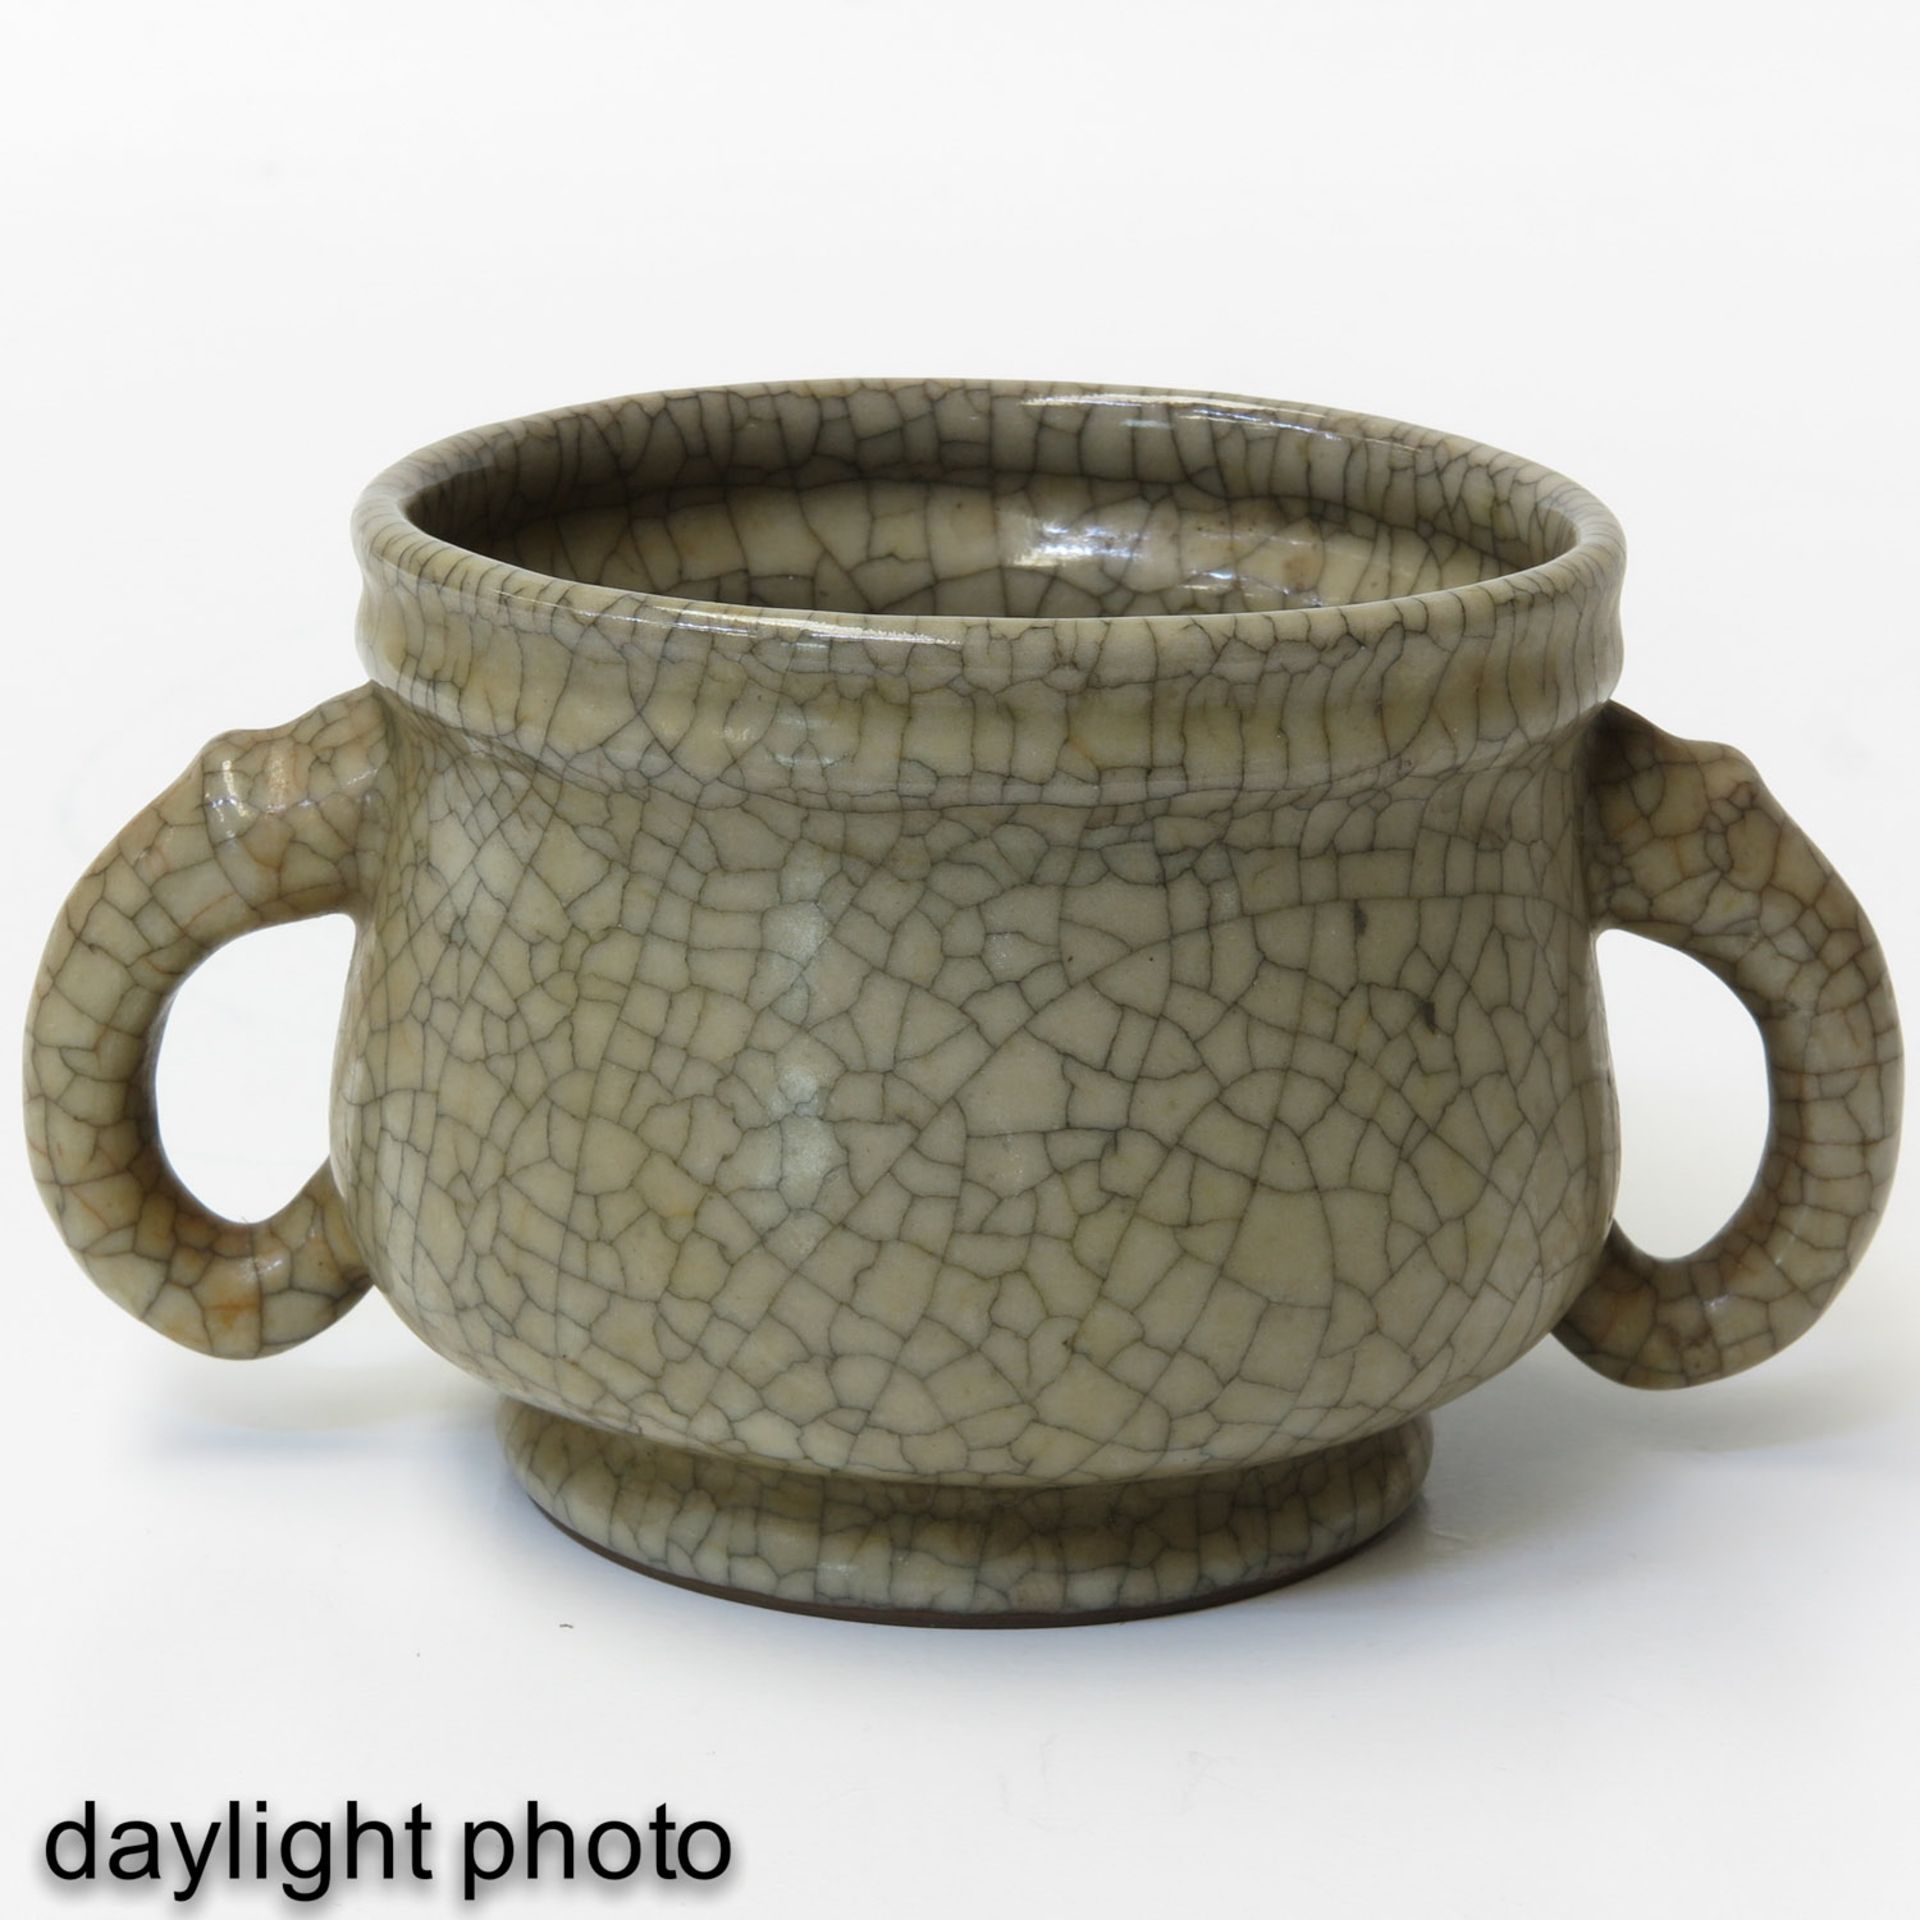 A Crackle Decor Vase with Handles - Image 7 of 9